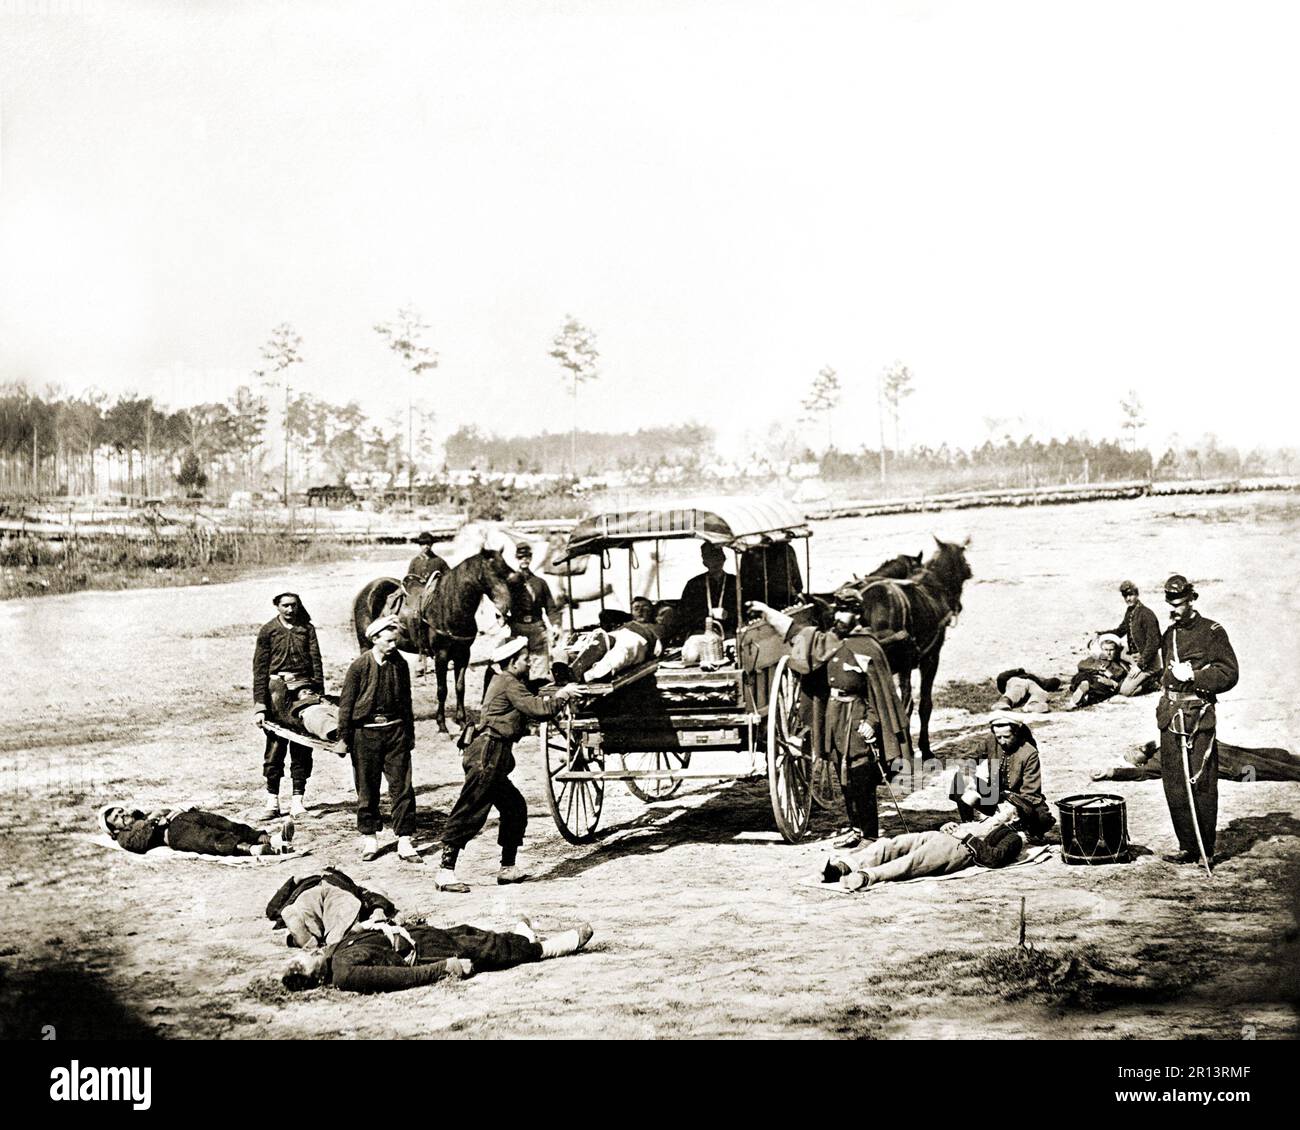 Ambulance Corps removing wounded from the field. United States Civil War; Ca. 1861-1865. Photographer unknown. Stock Photo